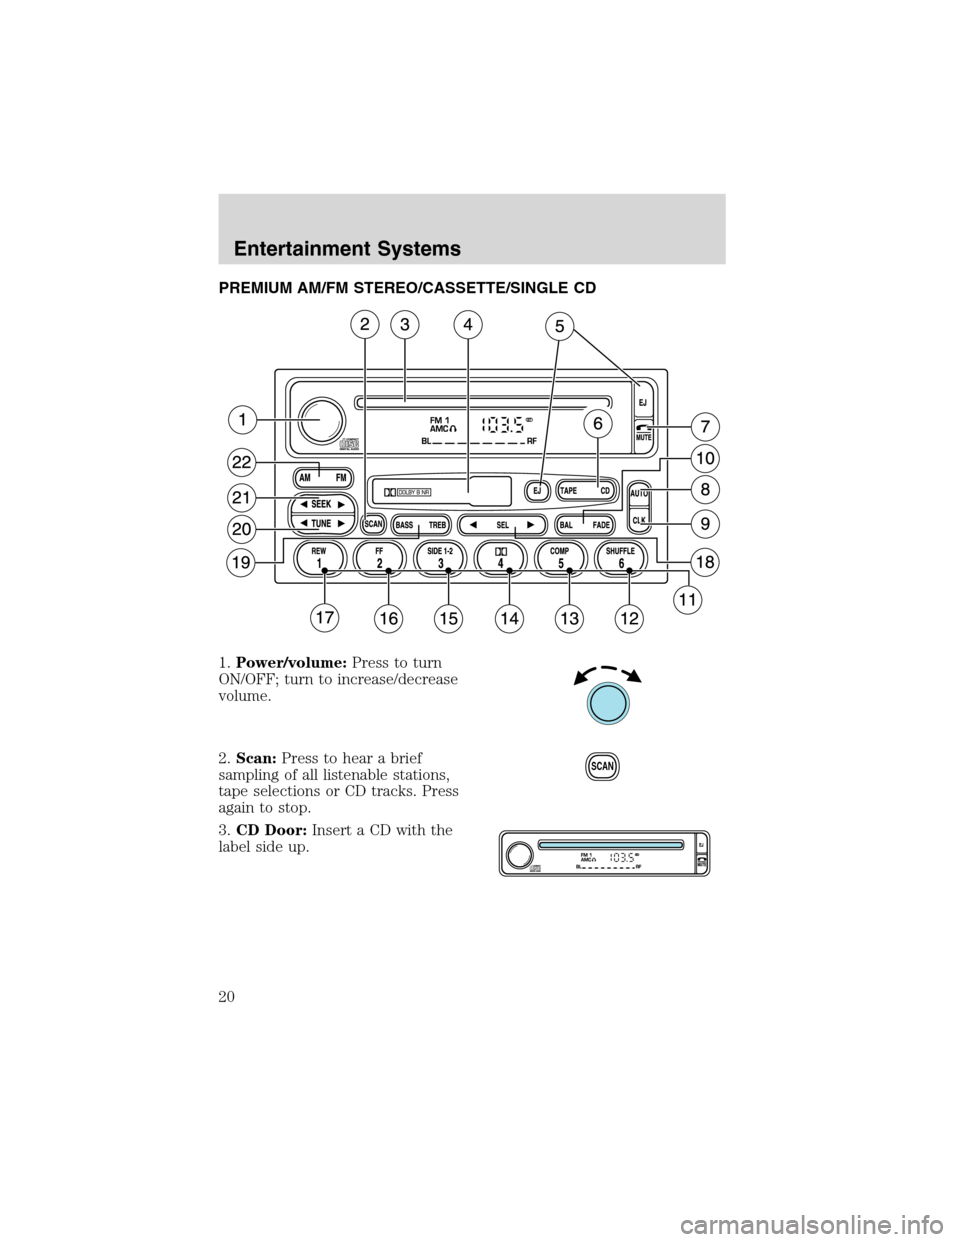 FORD E SERIES 2003 4.G User Guide PREMIUM AM/FM STEREO/CASSETTE/SINGLE CD
1.Power/volume:Press to turn
ON/OFF; turn to increase/decrease
volume.
2.Scan:Press to hear a brief
sampling of all listenable stations,
tape selections or CD t